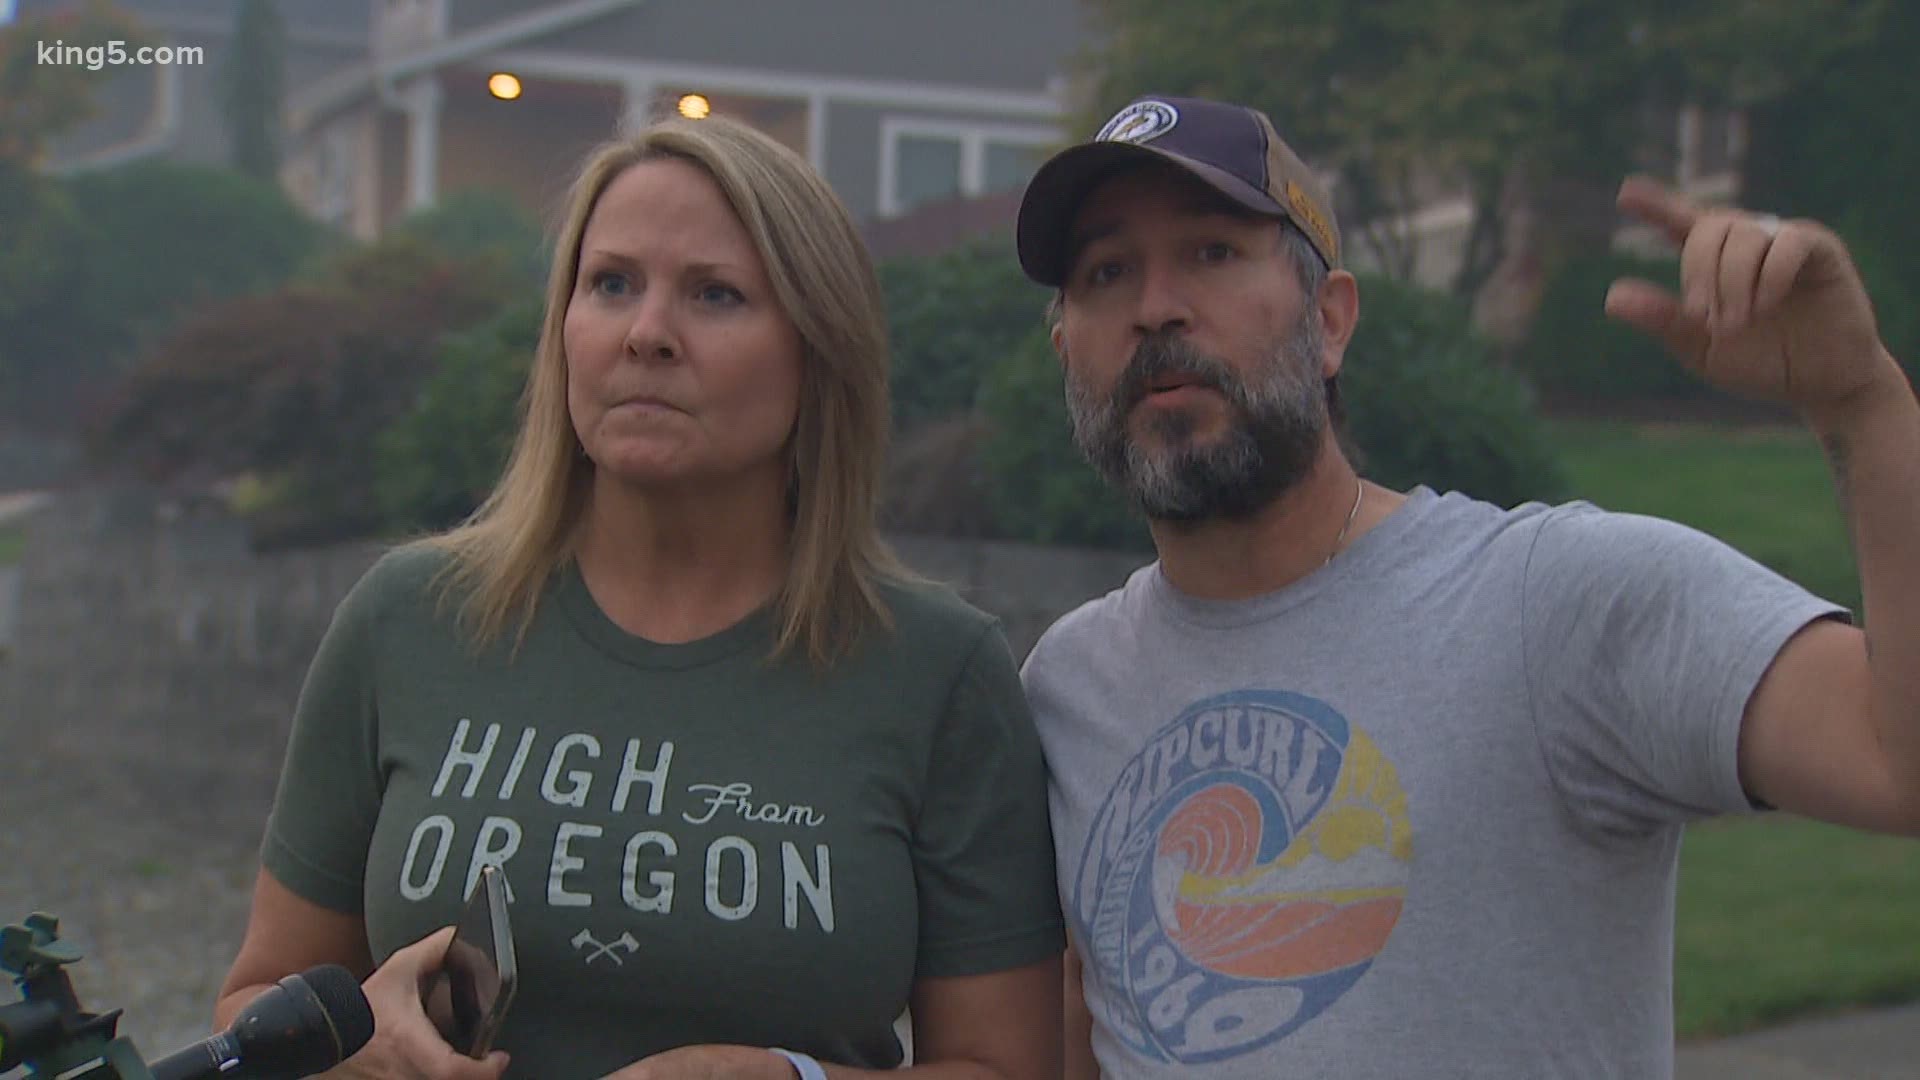 Bonney Lake residents are thanking firefighters and reaching out to neighbors after the Sumner Grade Fire forced Level 3 evacuations and destroyed some homes.